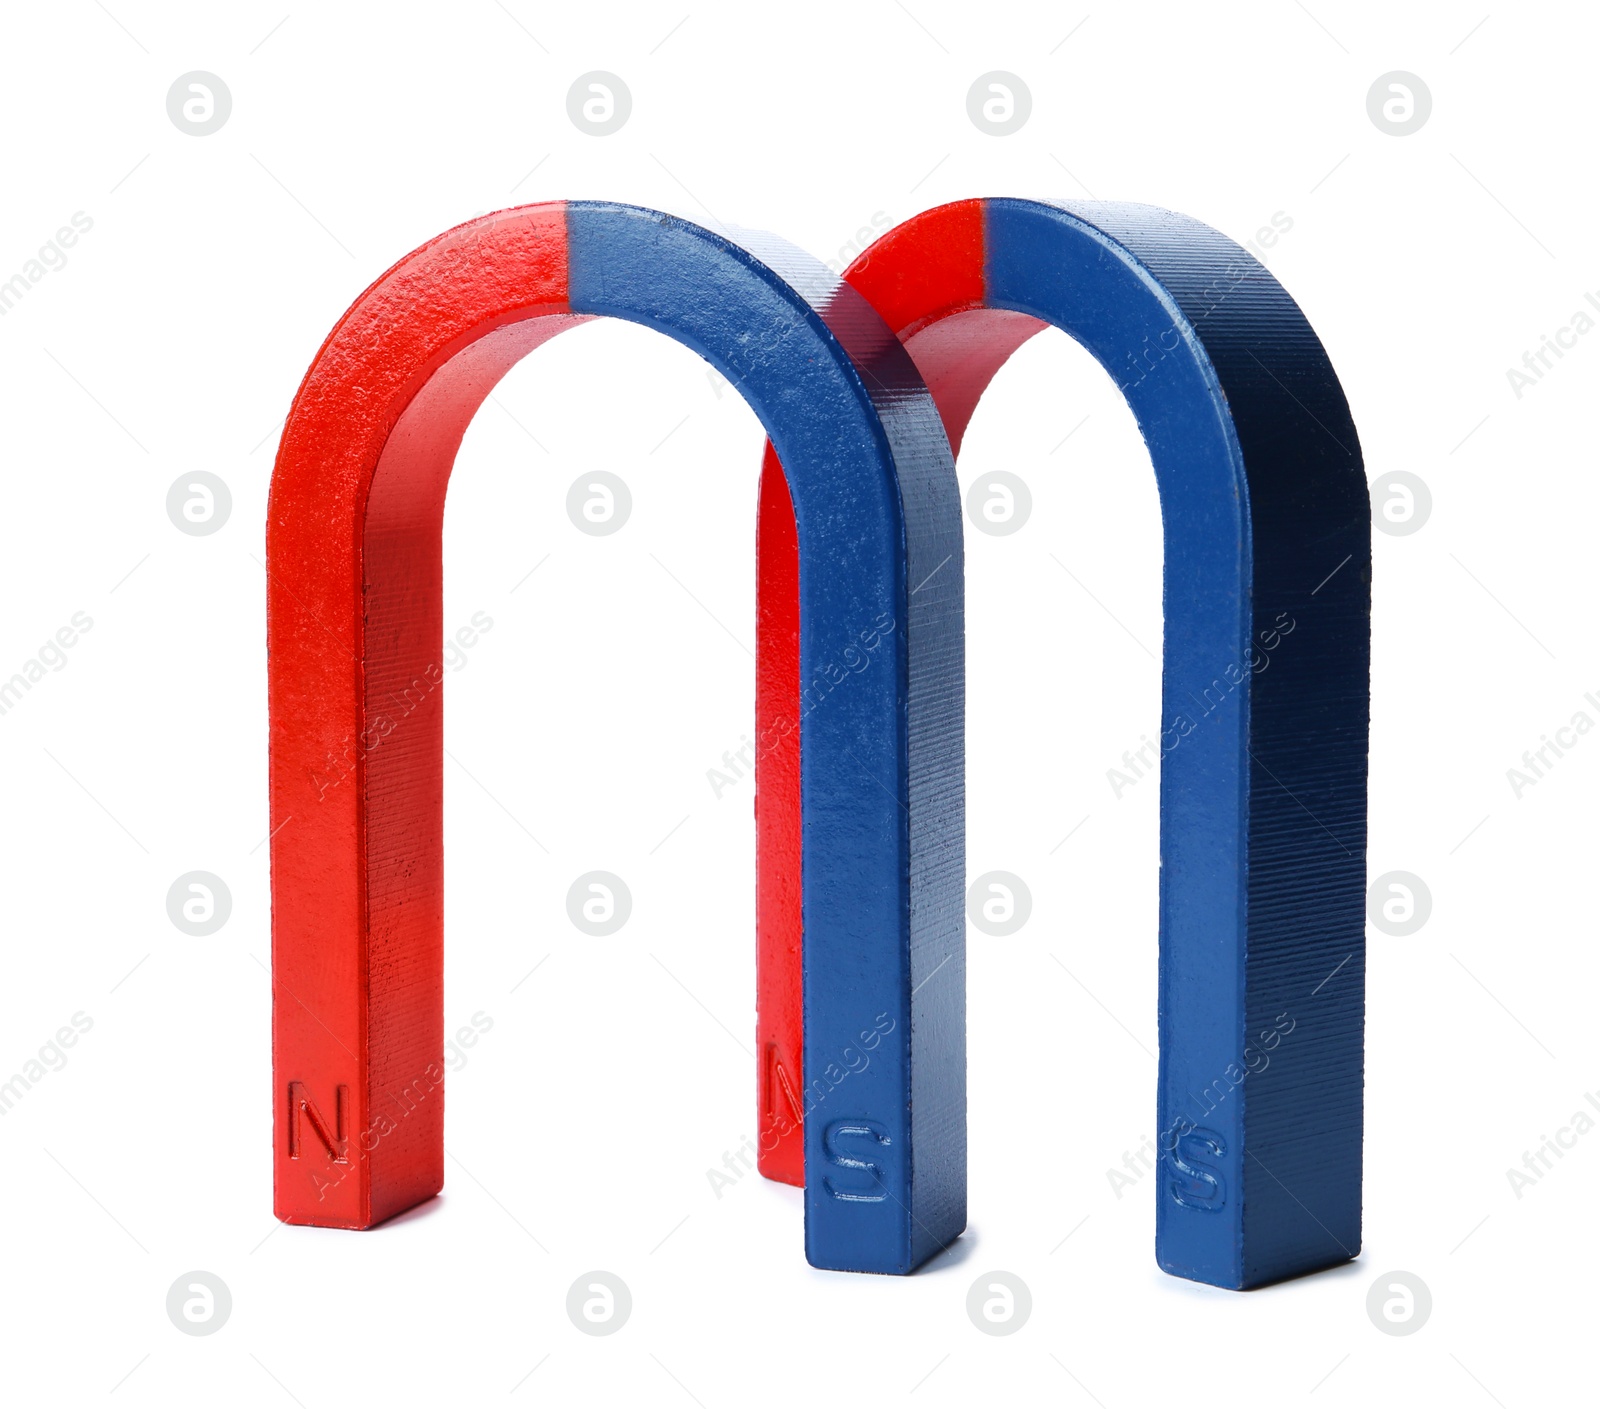 Photo of Red and blue horseshoe magnets isolated on white